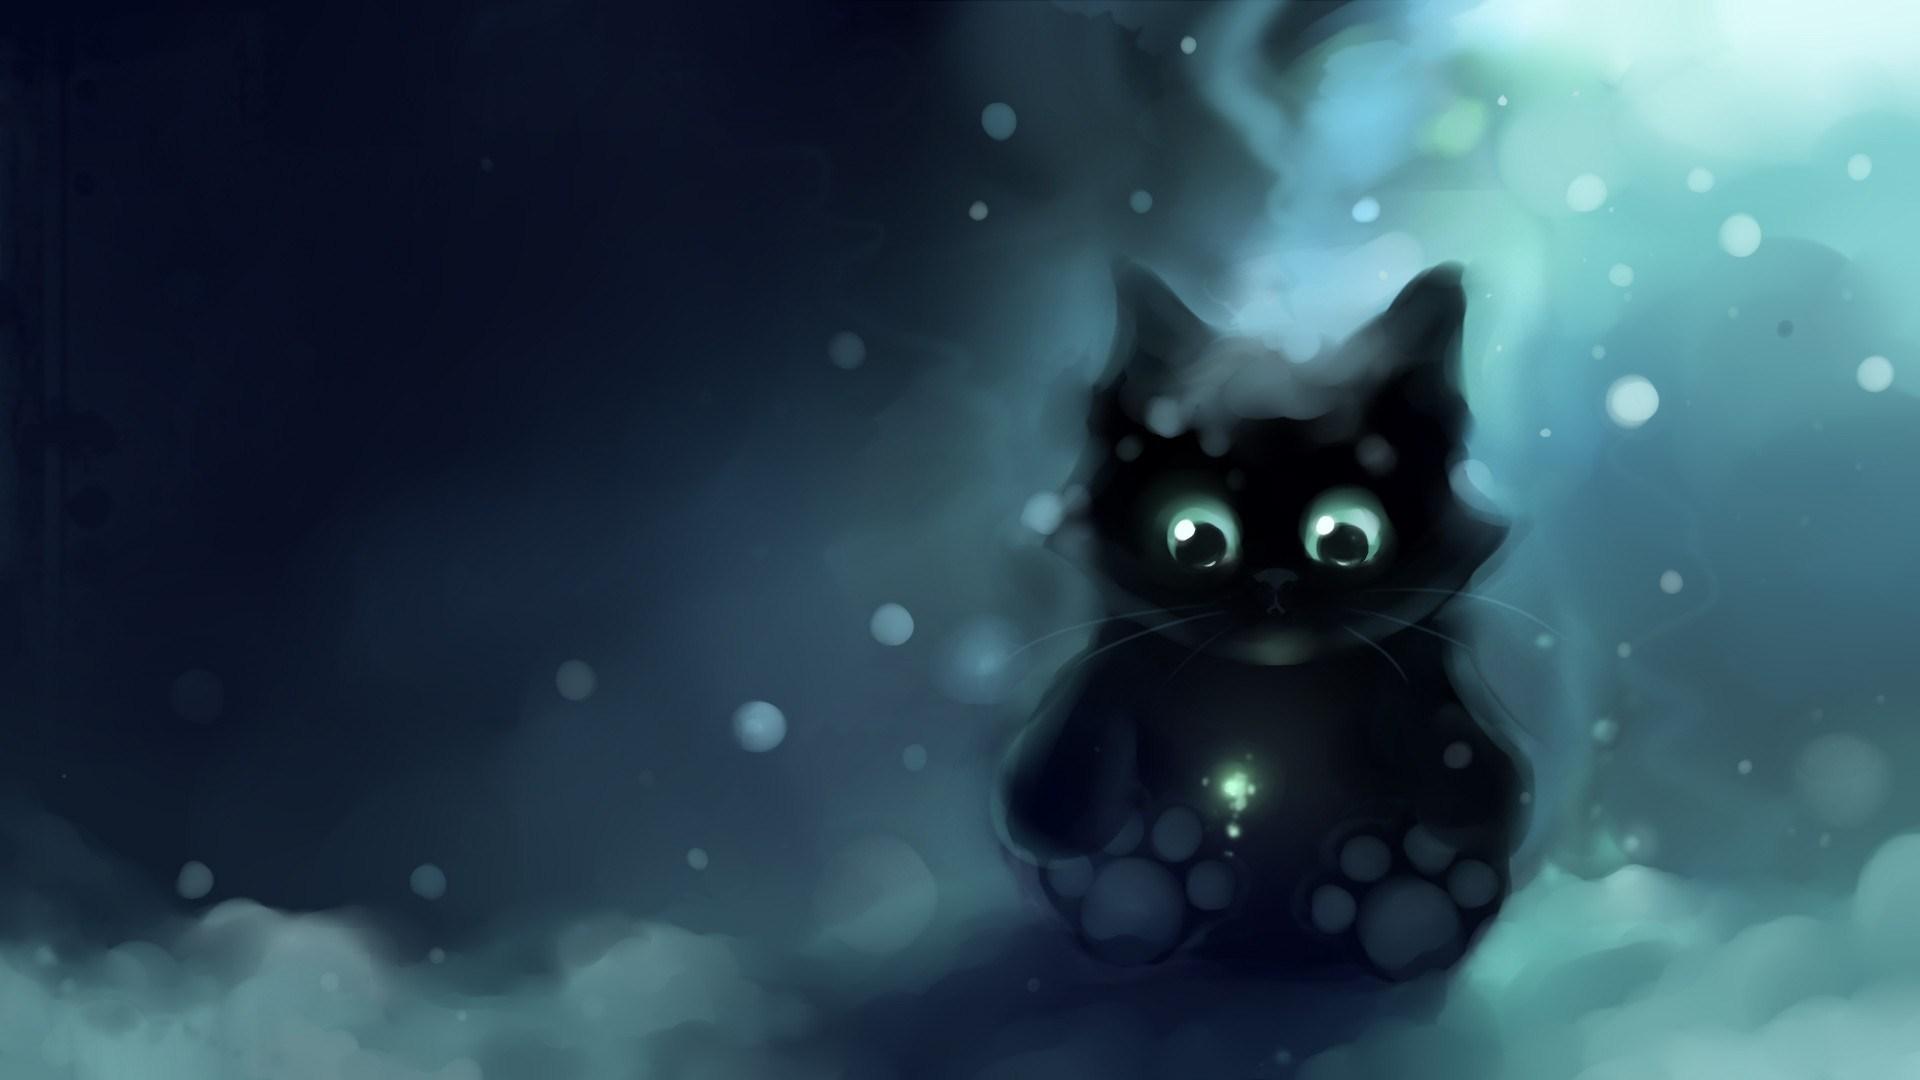 Animated Cats Wallpapers - Wallpaper Cave